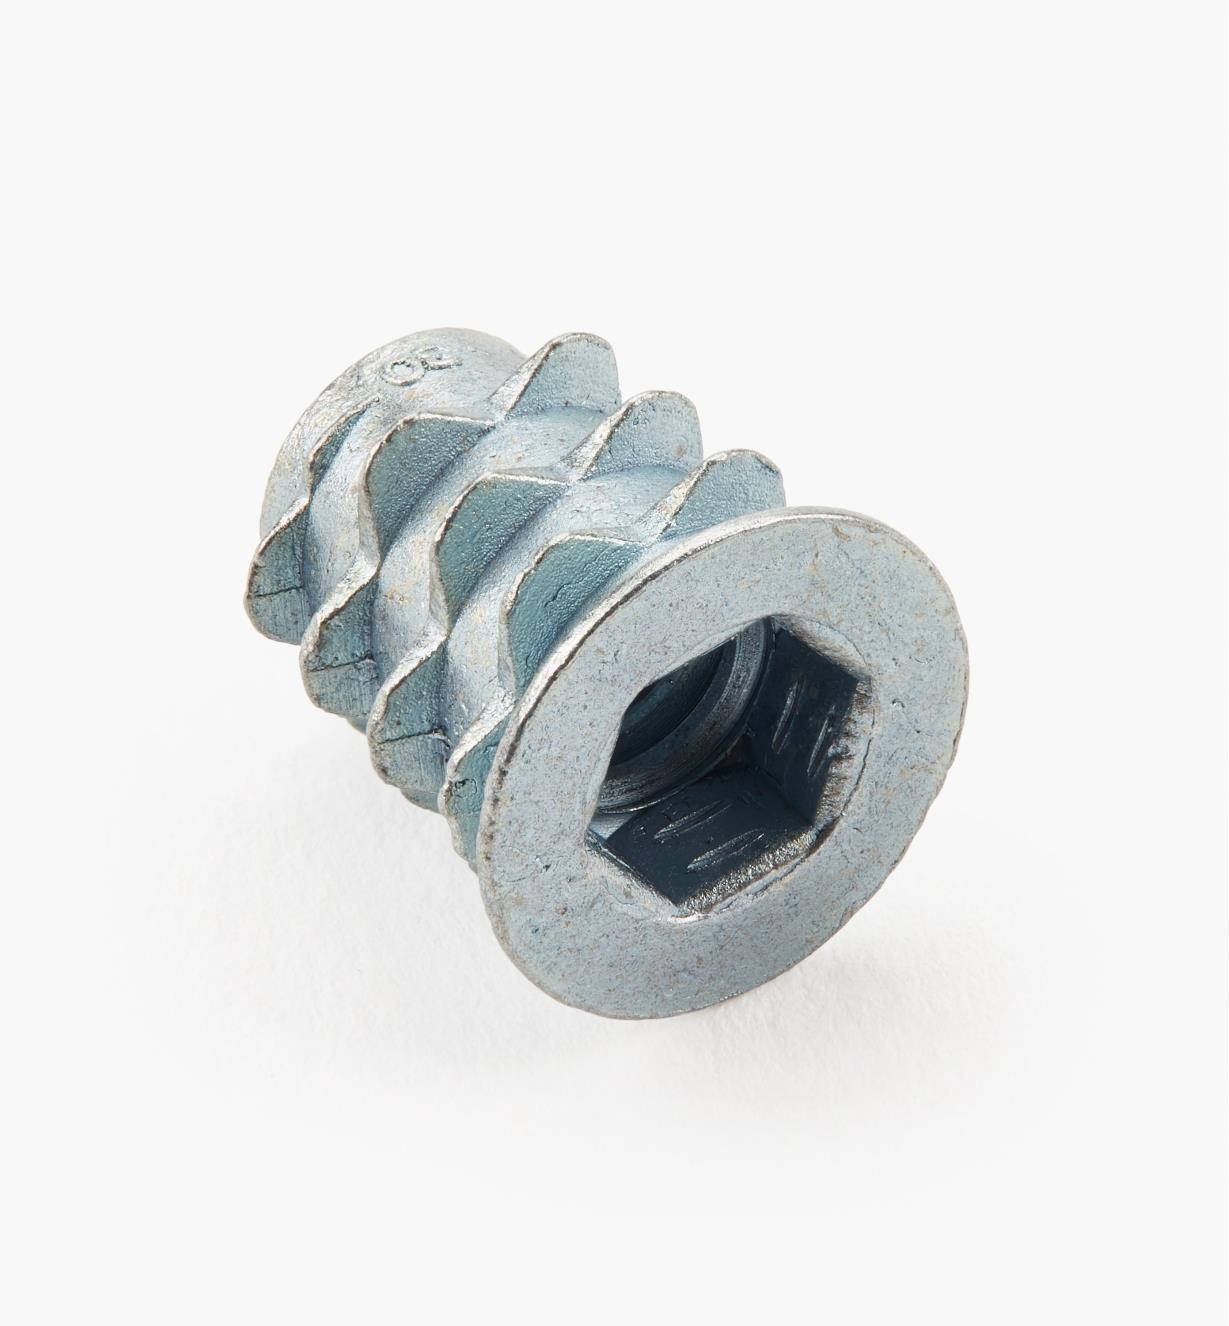 00N1013 - 13mm Flanged Nut, 1/4 20 Quick-Connect